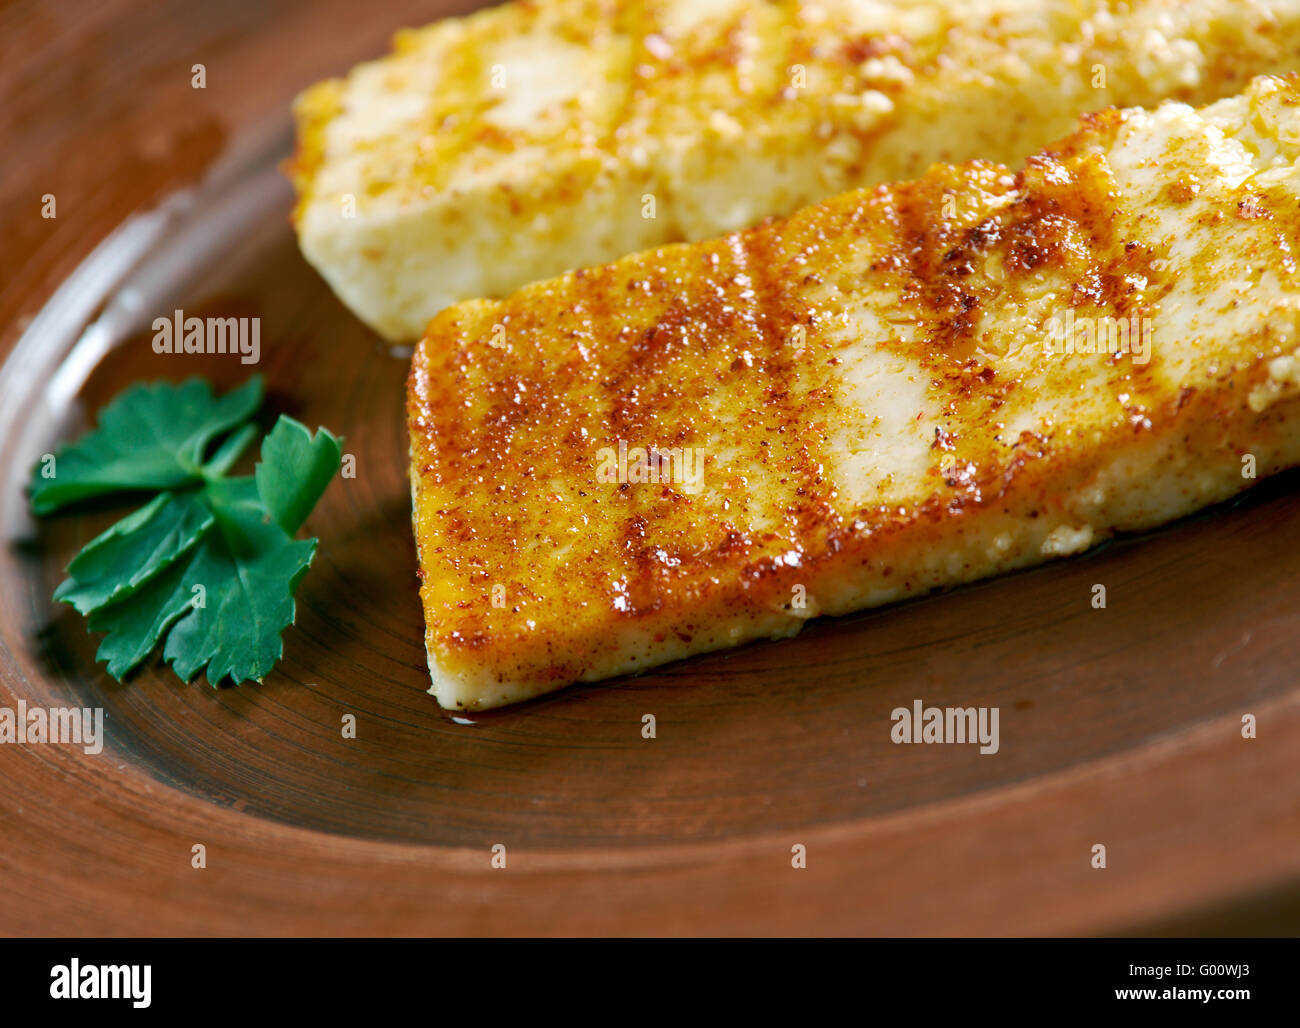 Grilled  Halloumi -  Cypriot semi-hard, unripened brined cheese. popular in the Levant, Greece and Turkey Stock Photo